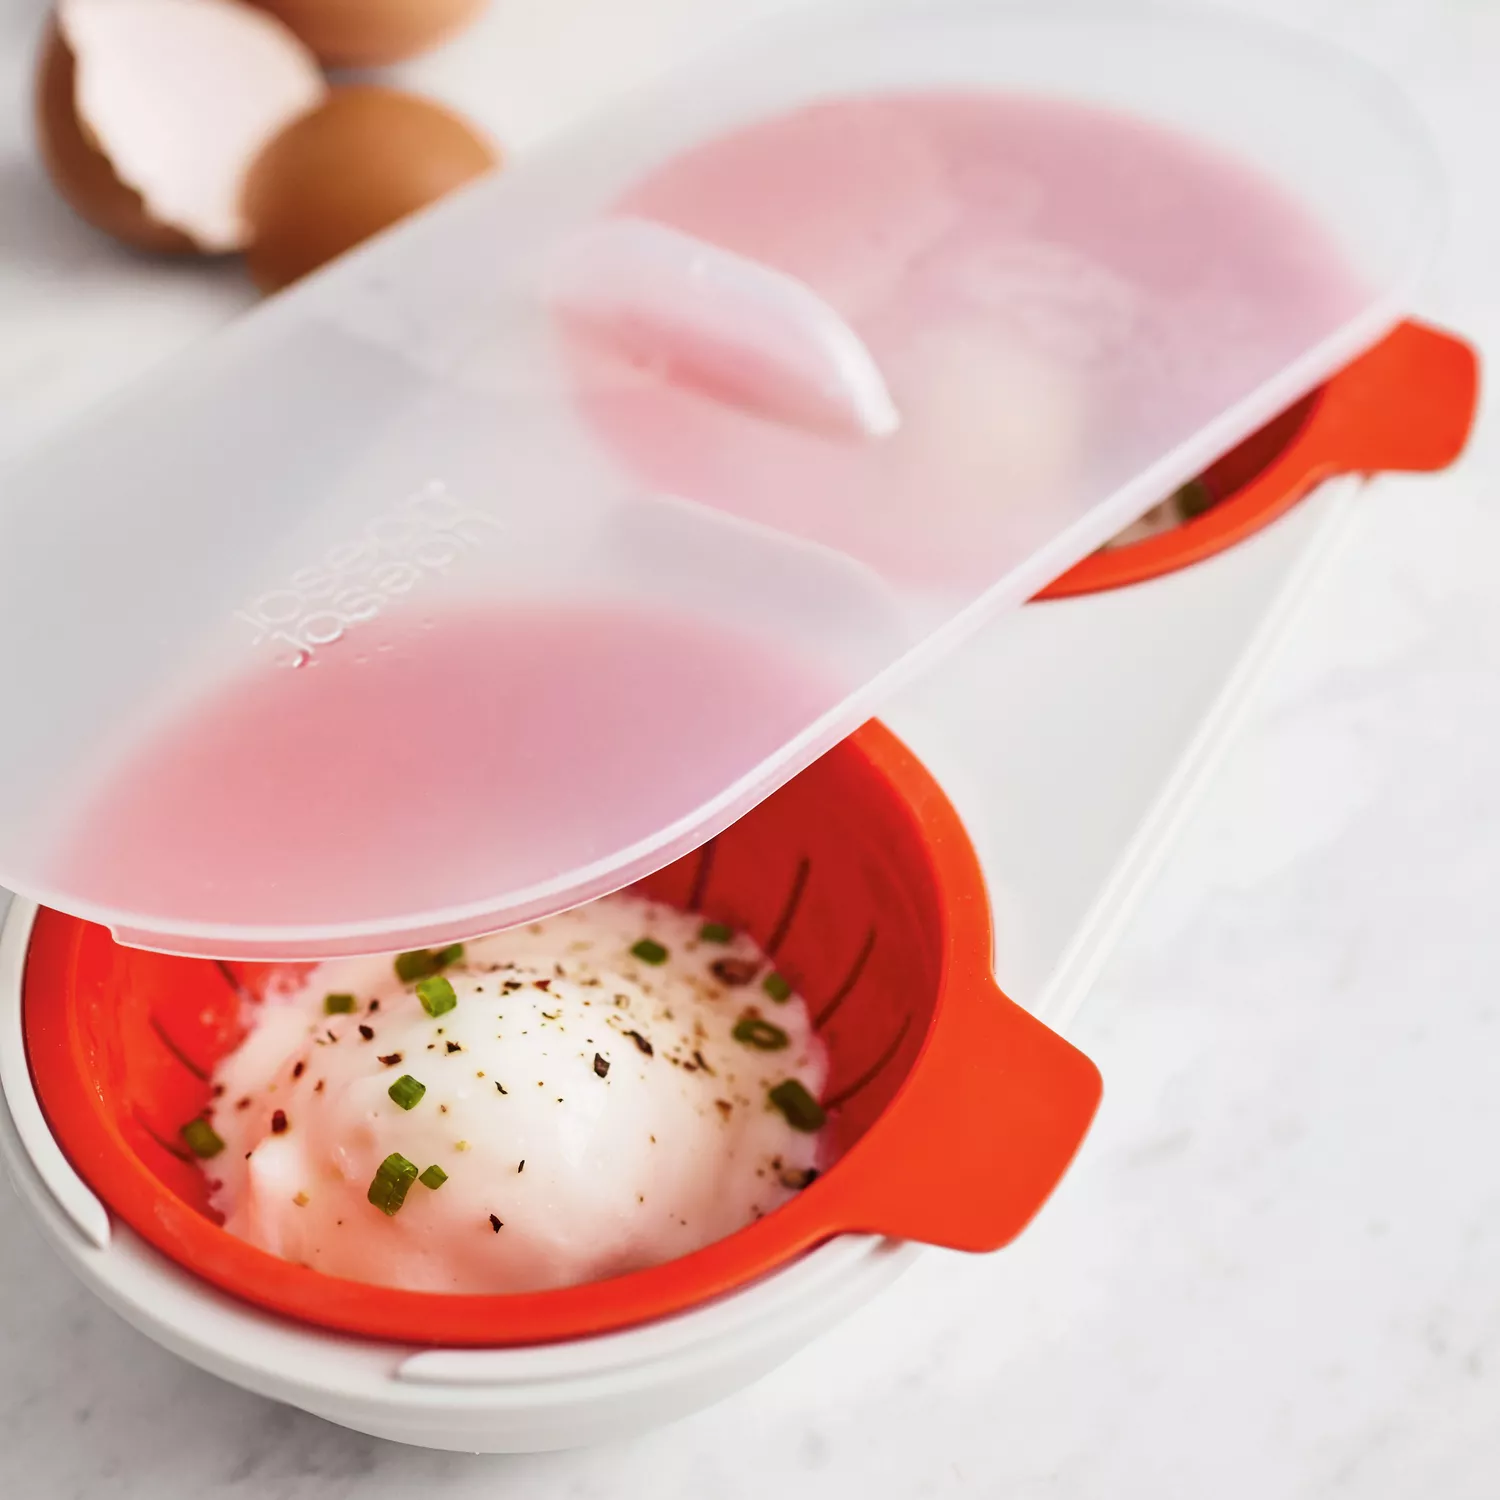 Nordic Ware Microwave 2 cup Egg Poacher - Reading China & Glass